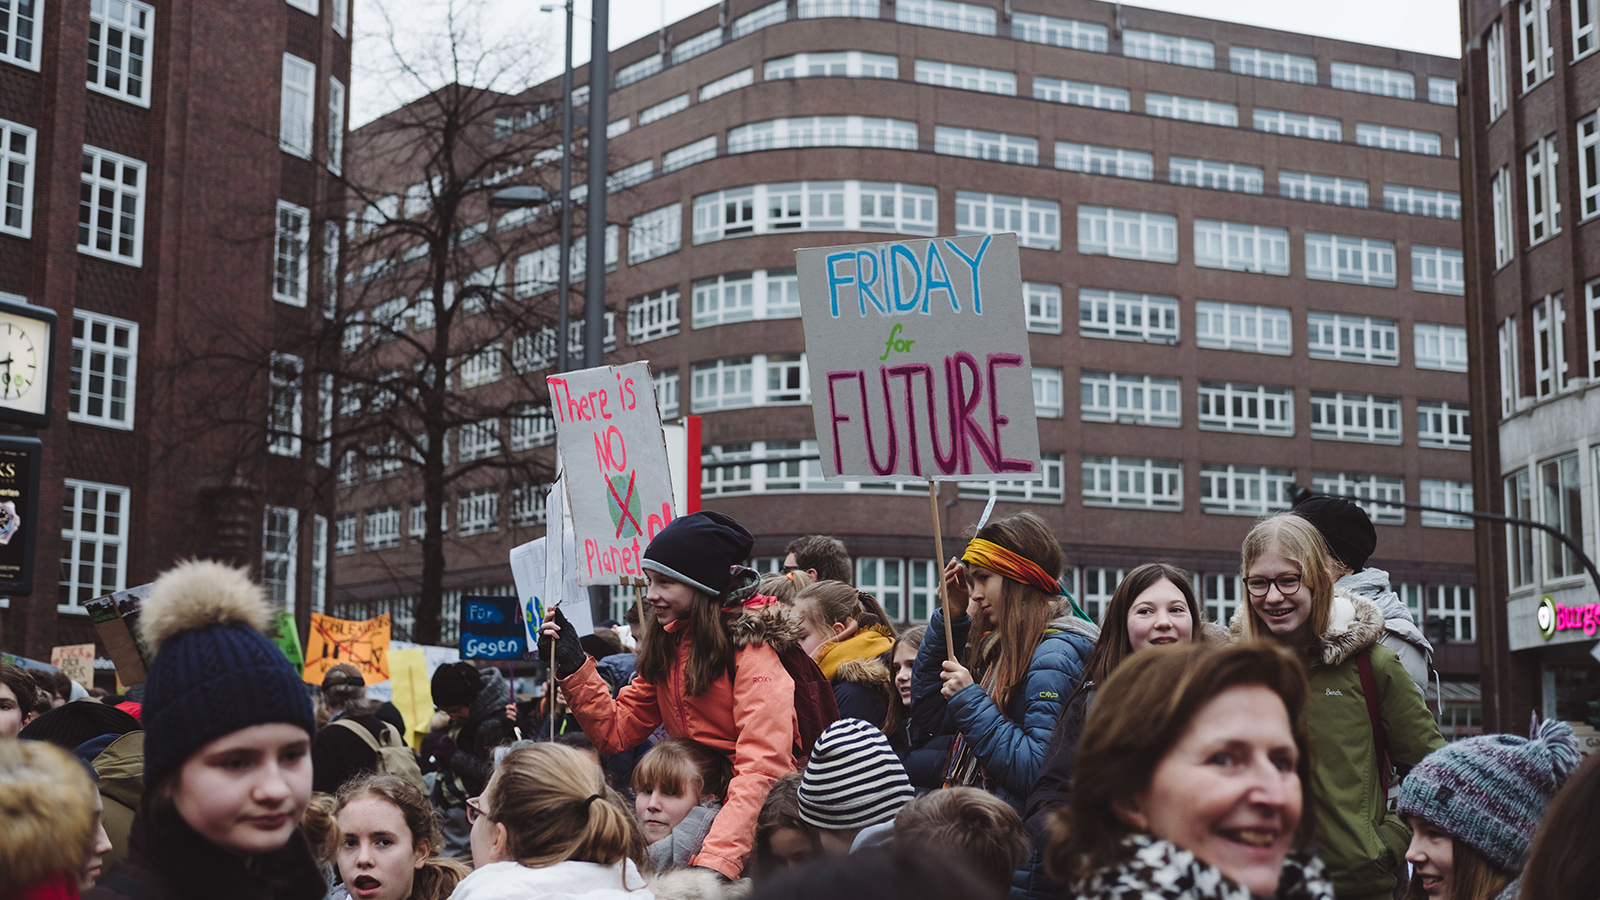 ecosia-joins-climate-strike-march-fridays-for-the-future-greta-thunberg-2-1